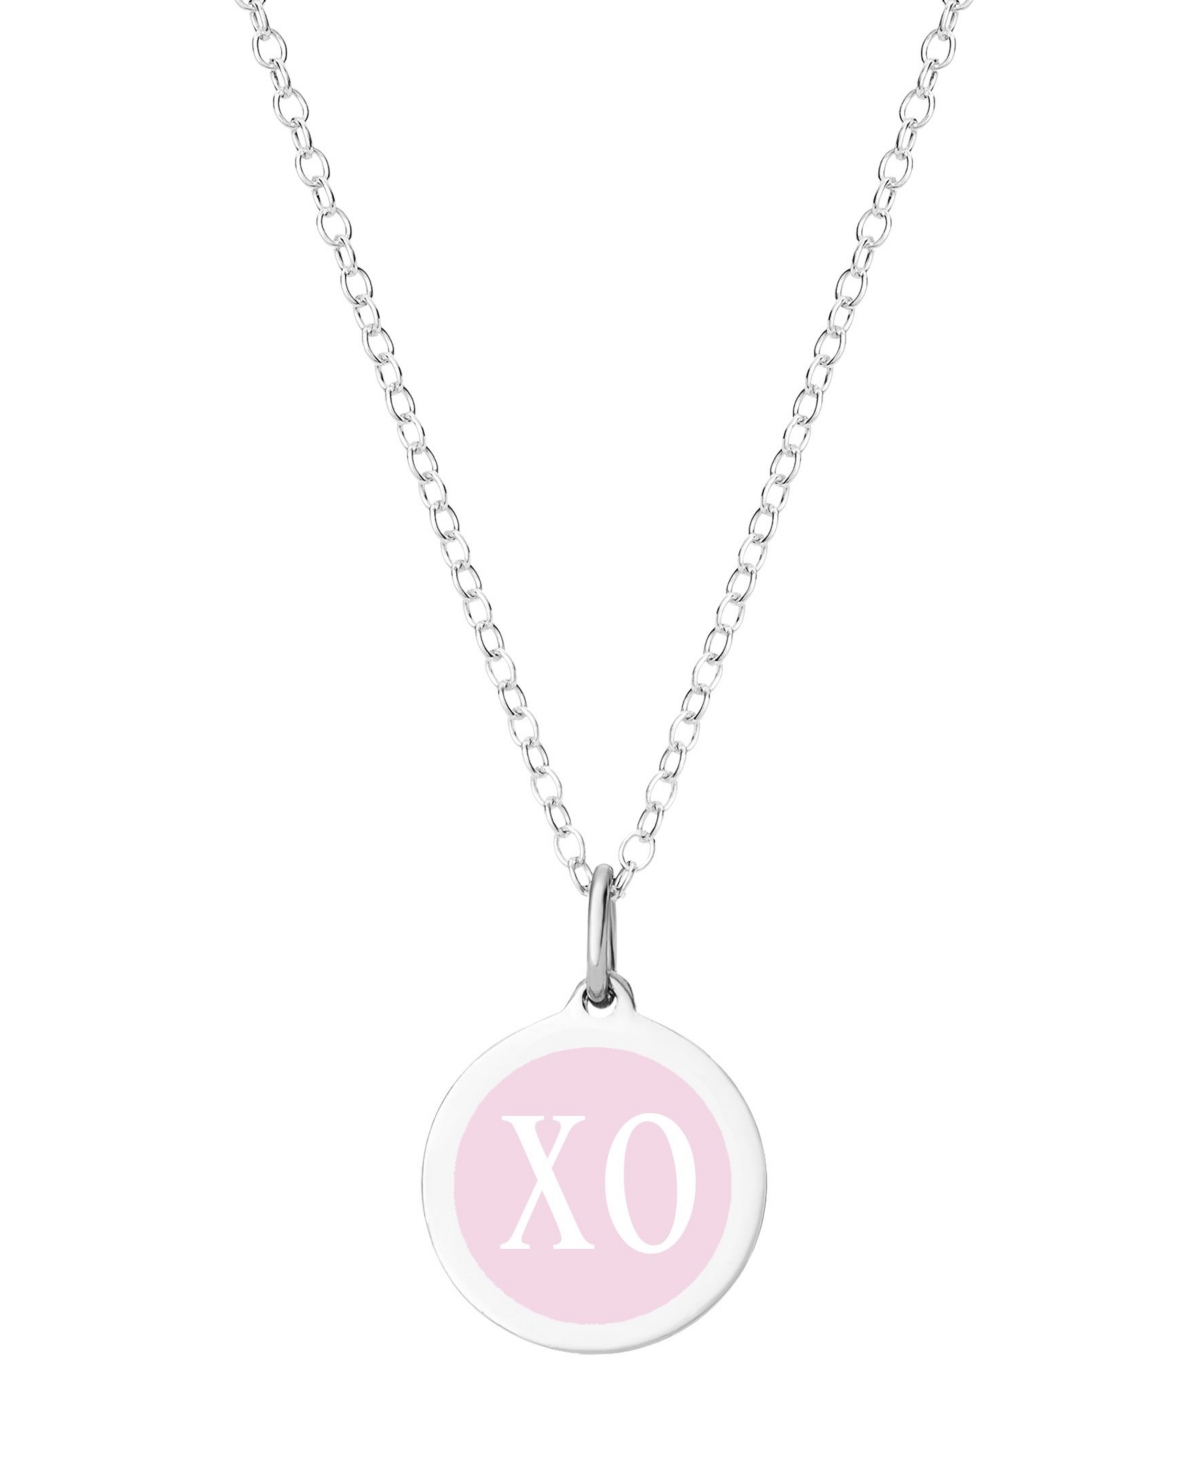 Mini Xo Pendant Necklace in Sterling Silver and Enamel, 16" + 2" Extender - Light Pink